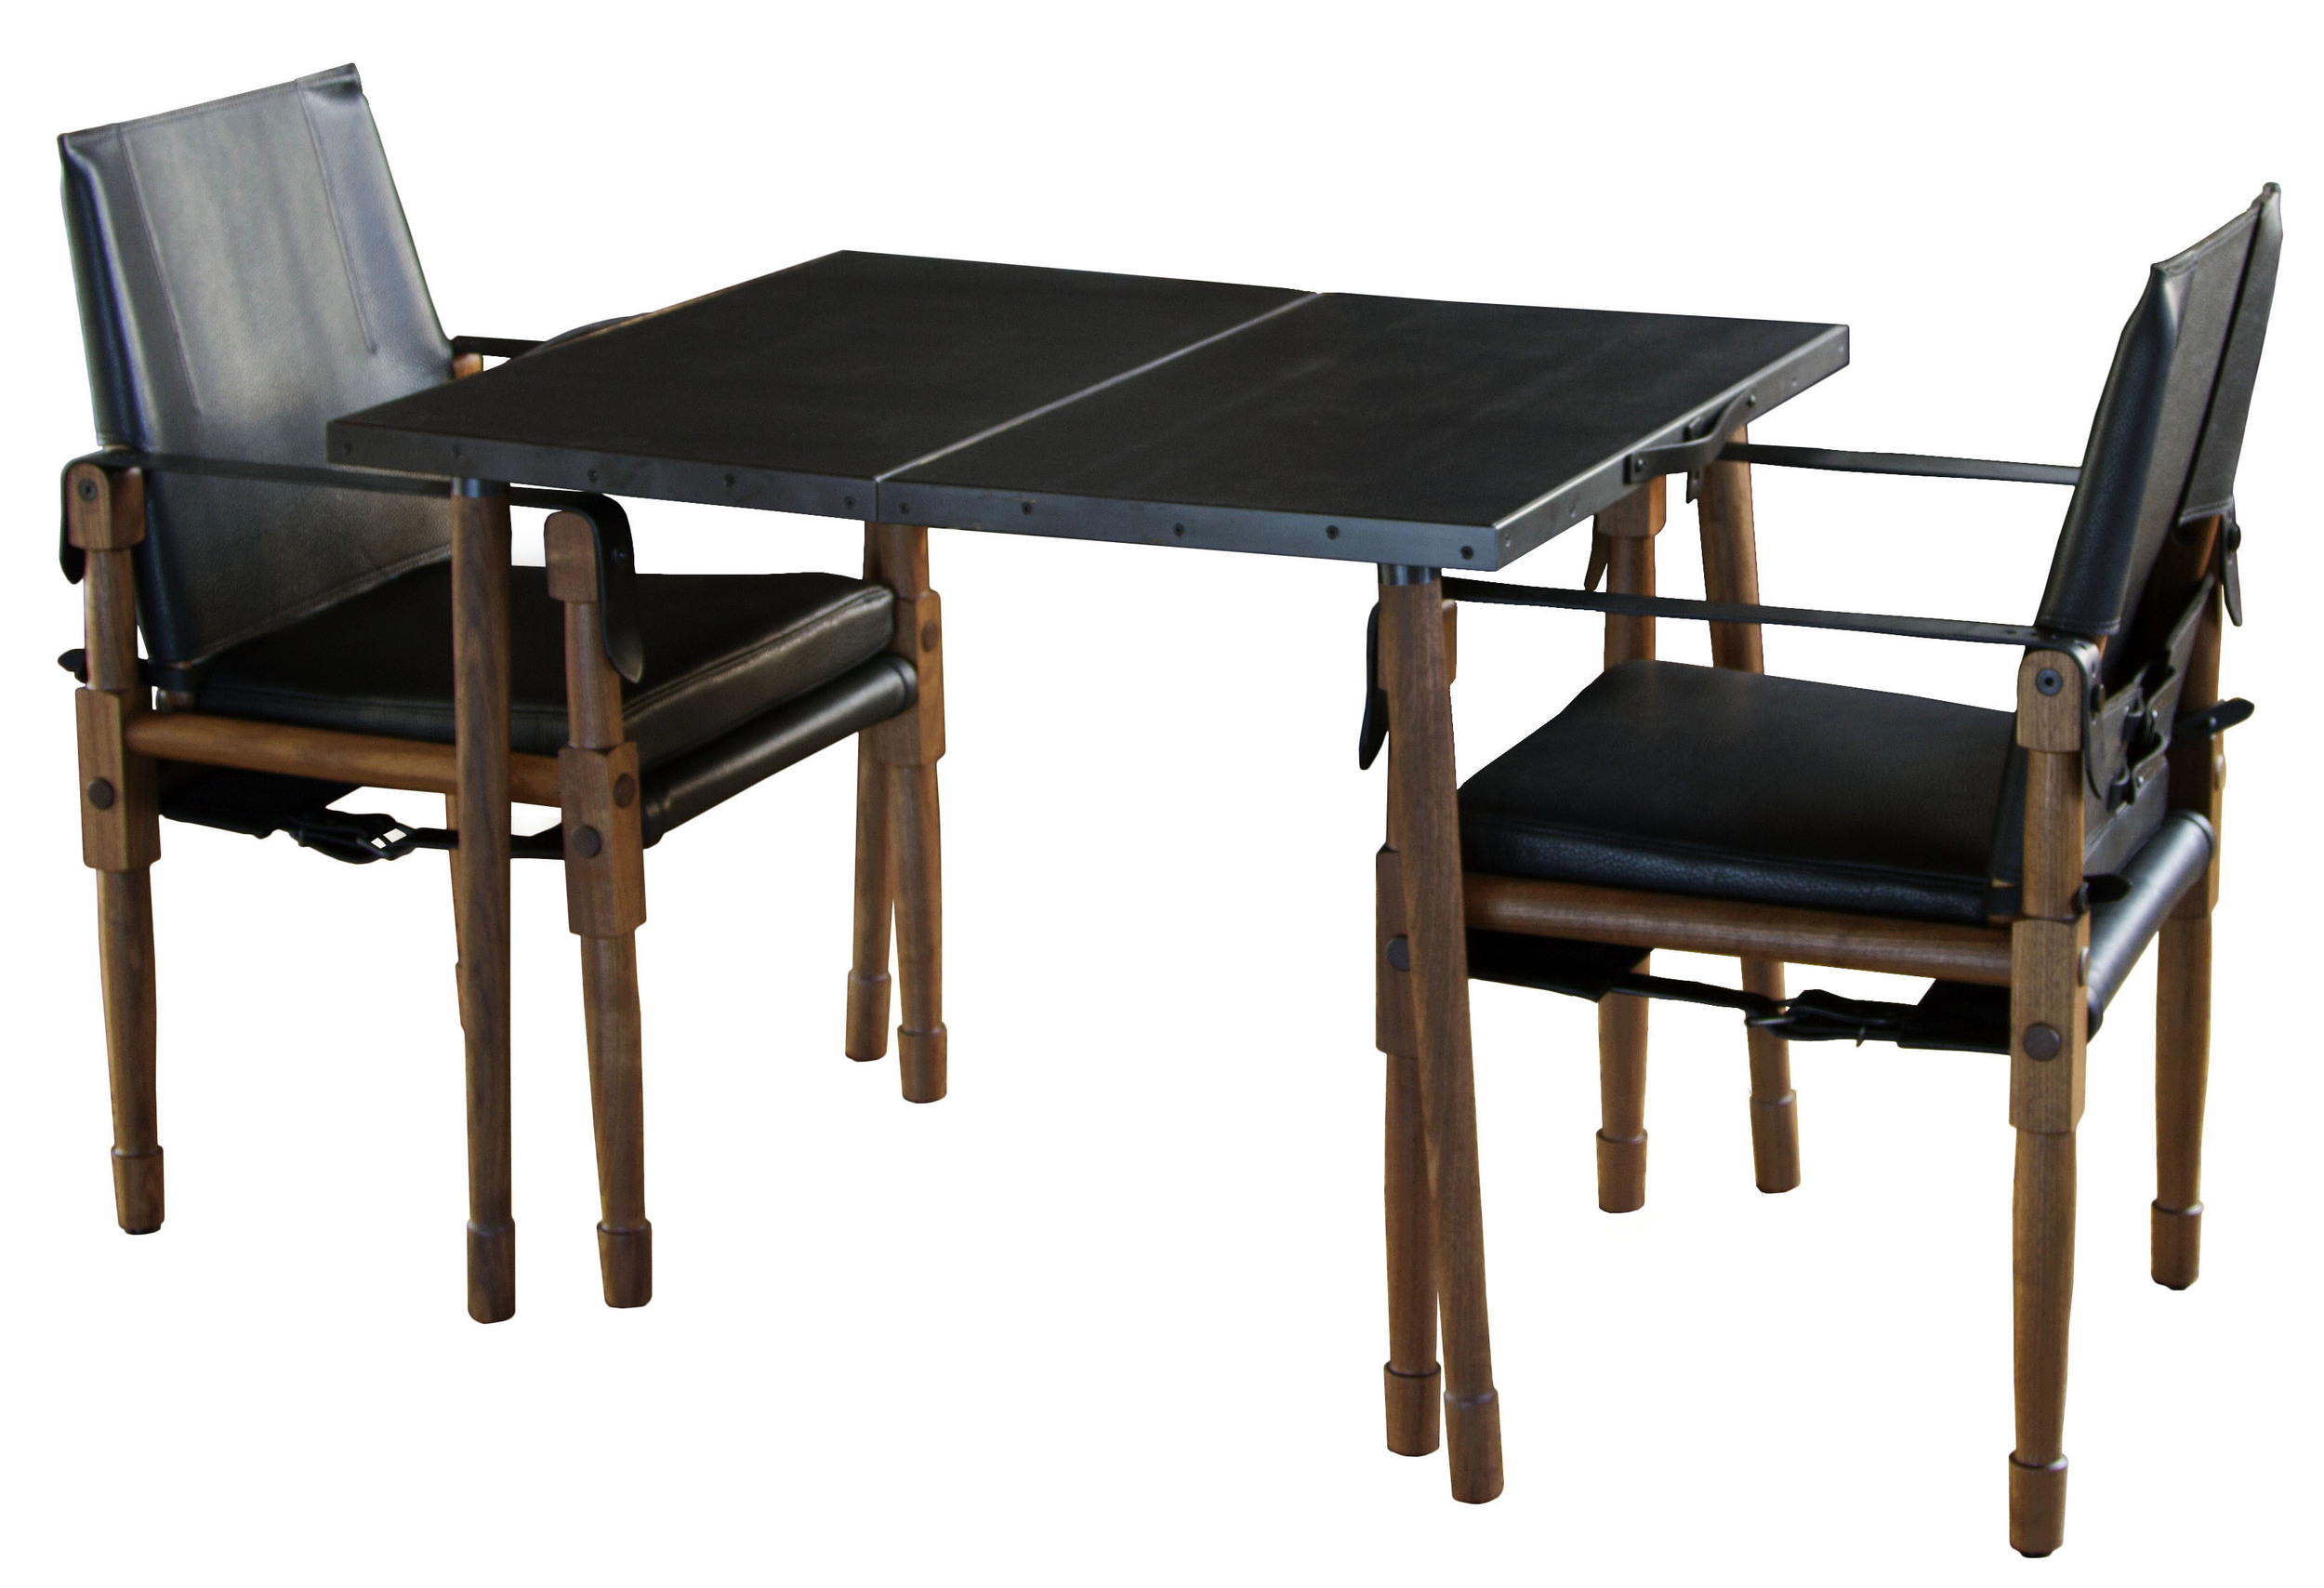  Collingswood Folding Table and Chatwin Chairs with black straps 